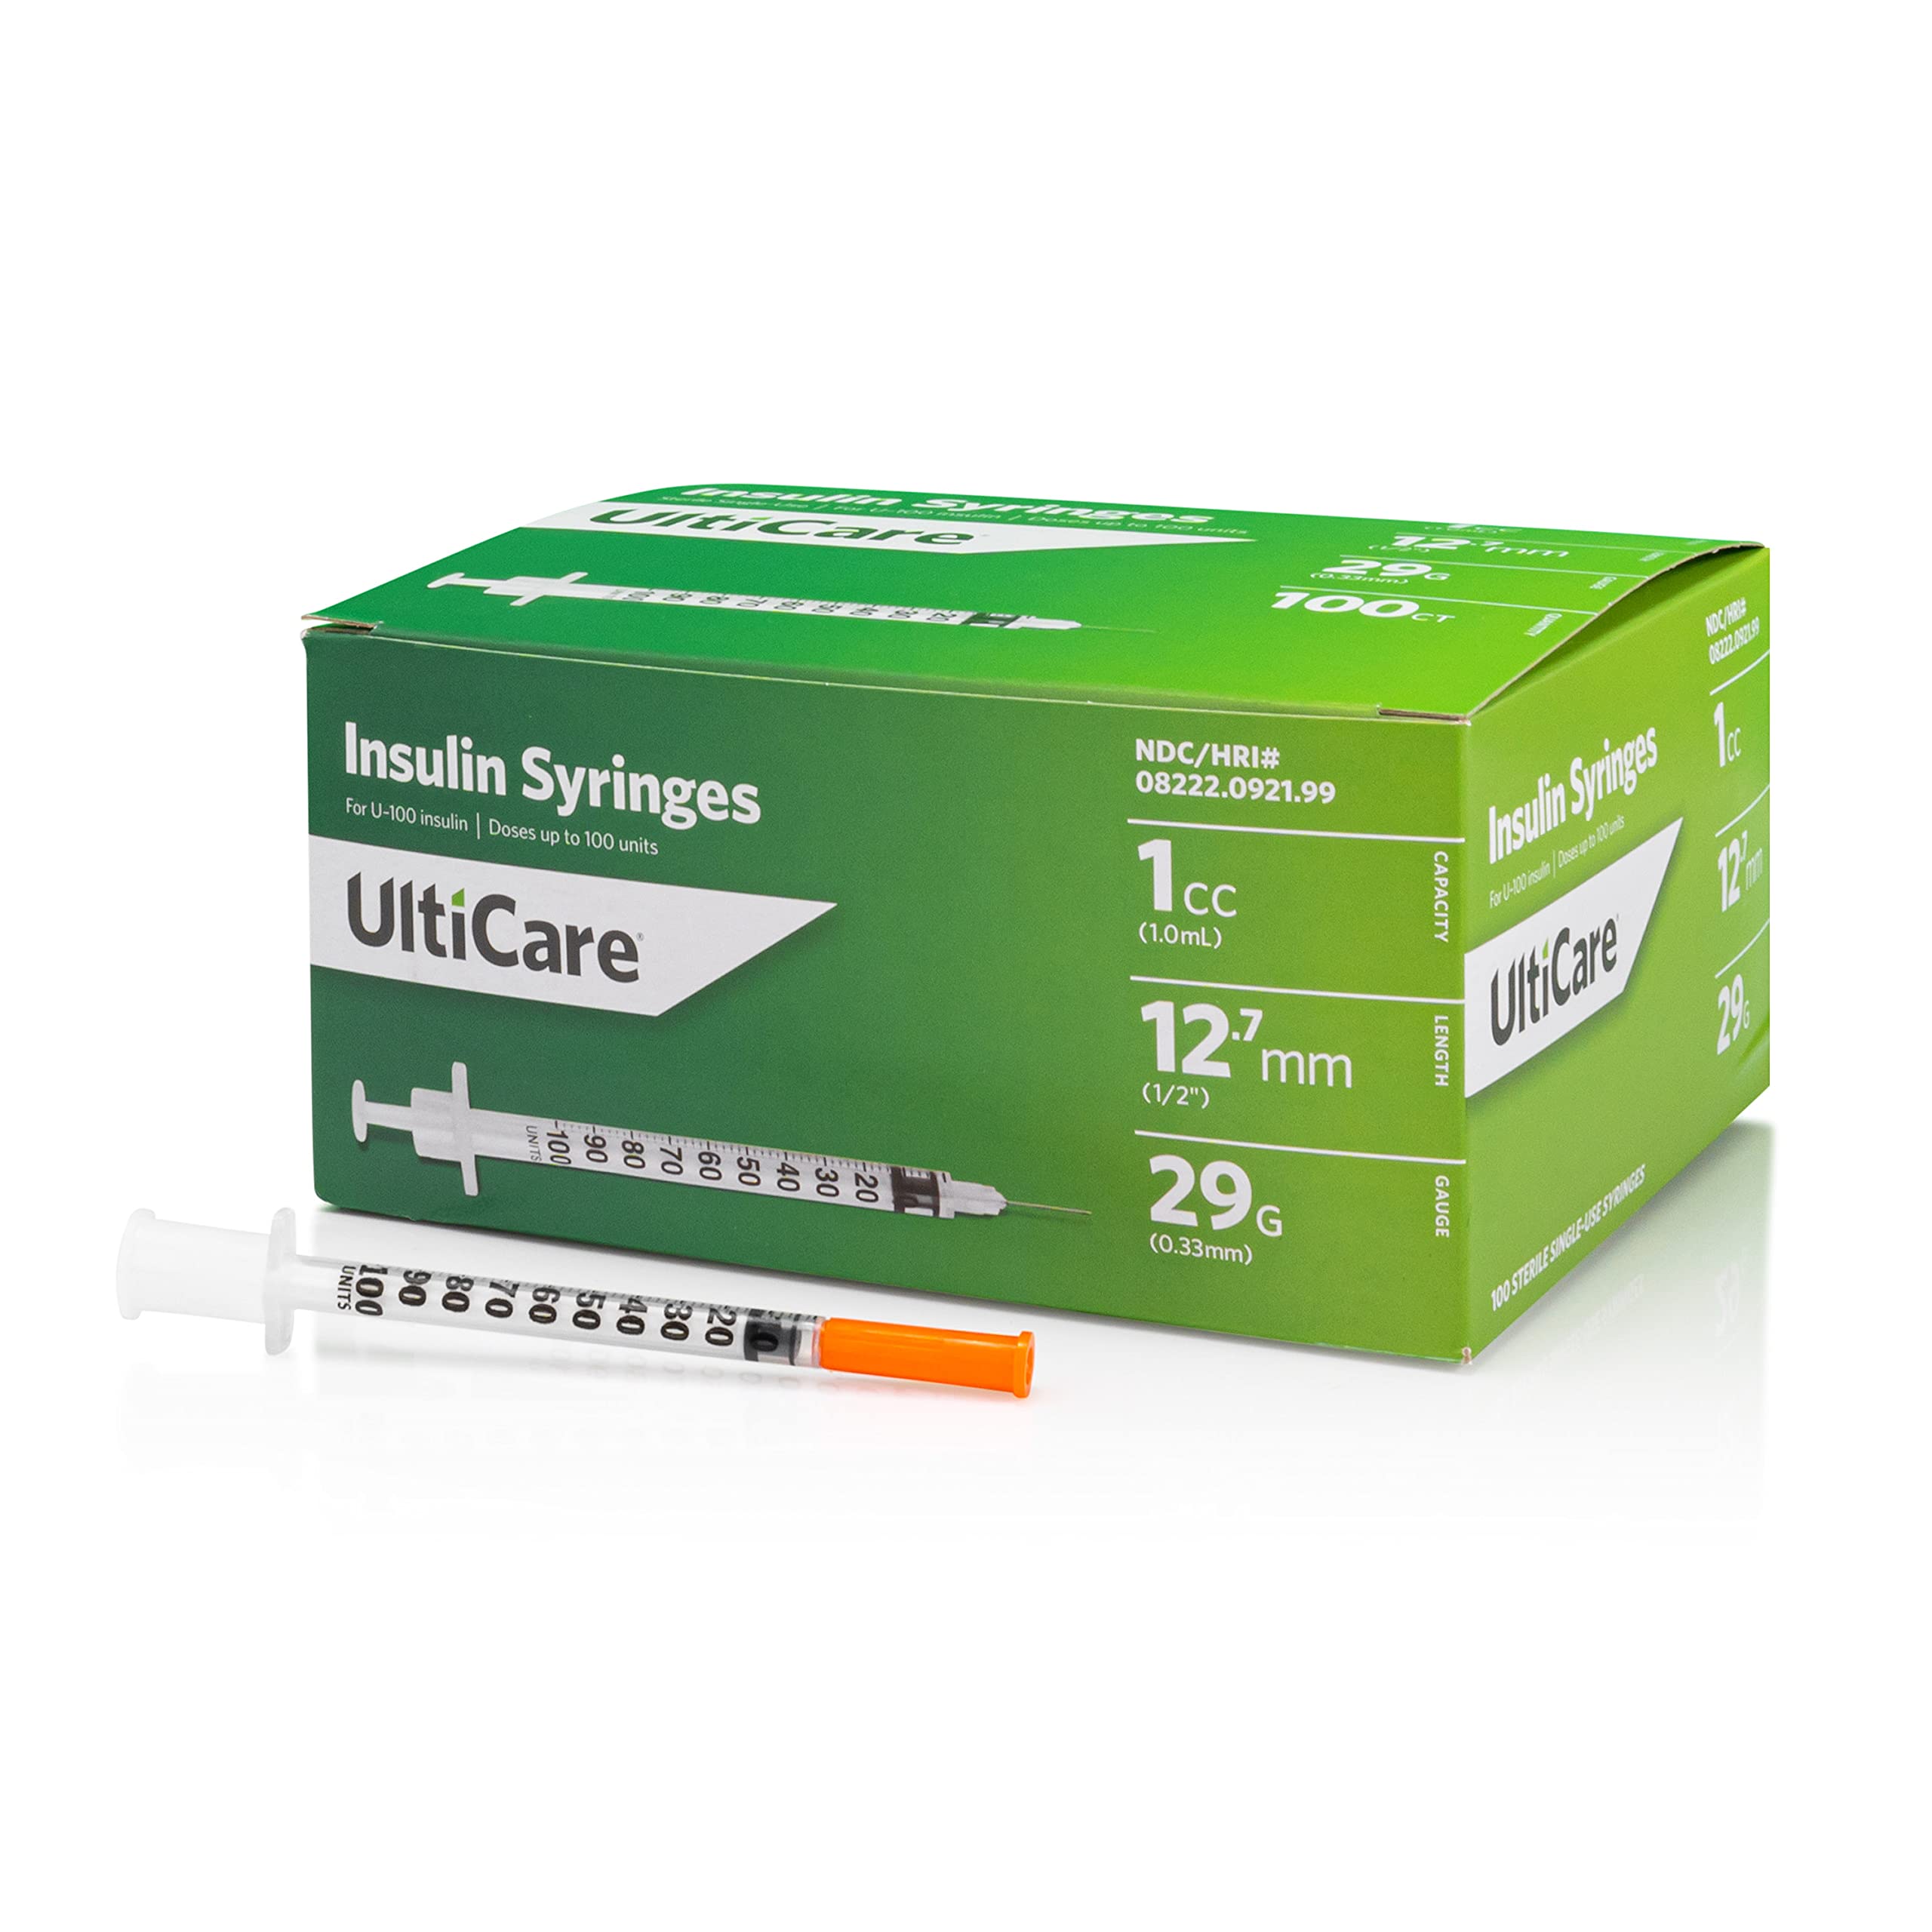 UltiCare U-100 Insulin Syringes, Comfortable and Accurate Dosing of Insulin, Compatible with Any U-100 Strength Insulin, Size: 1cc, 29G x , 100 ct Box